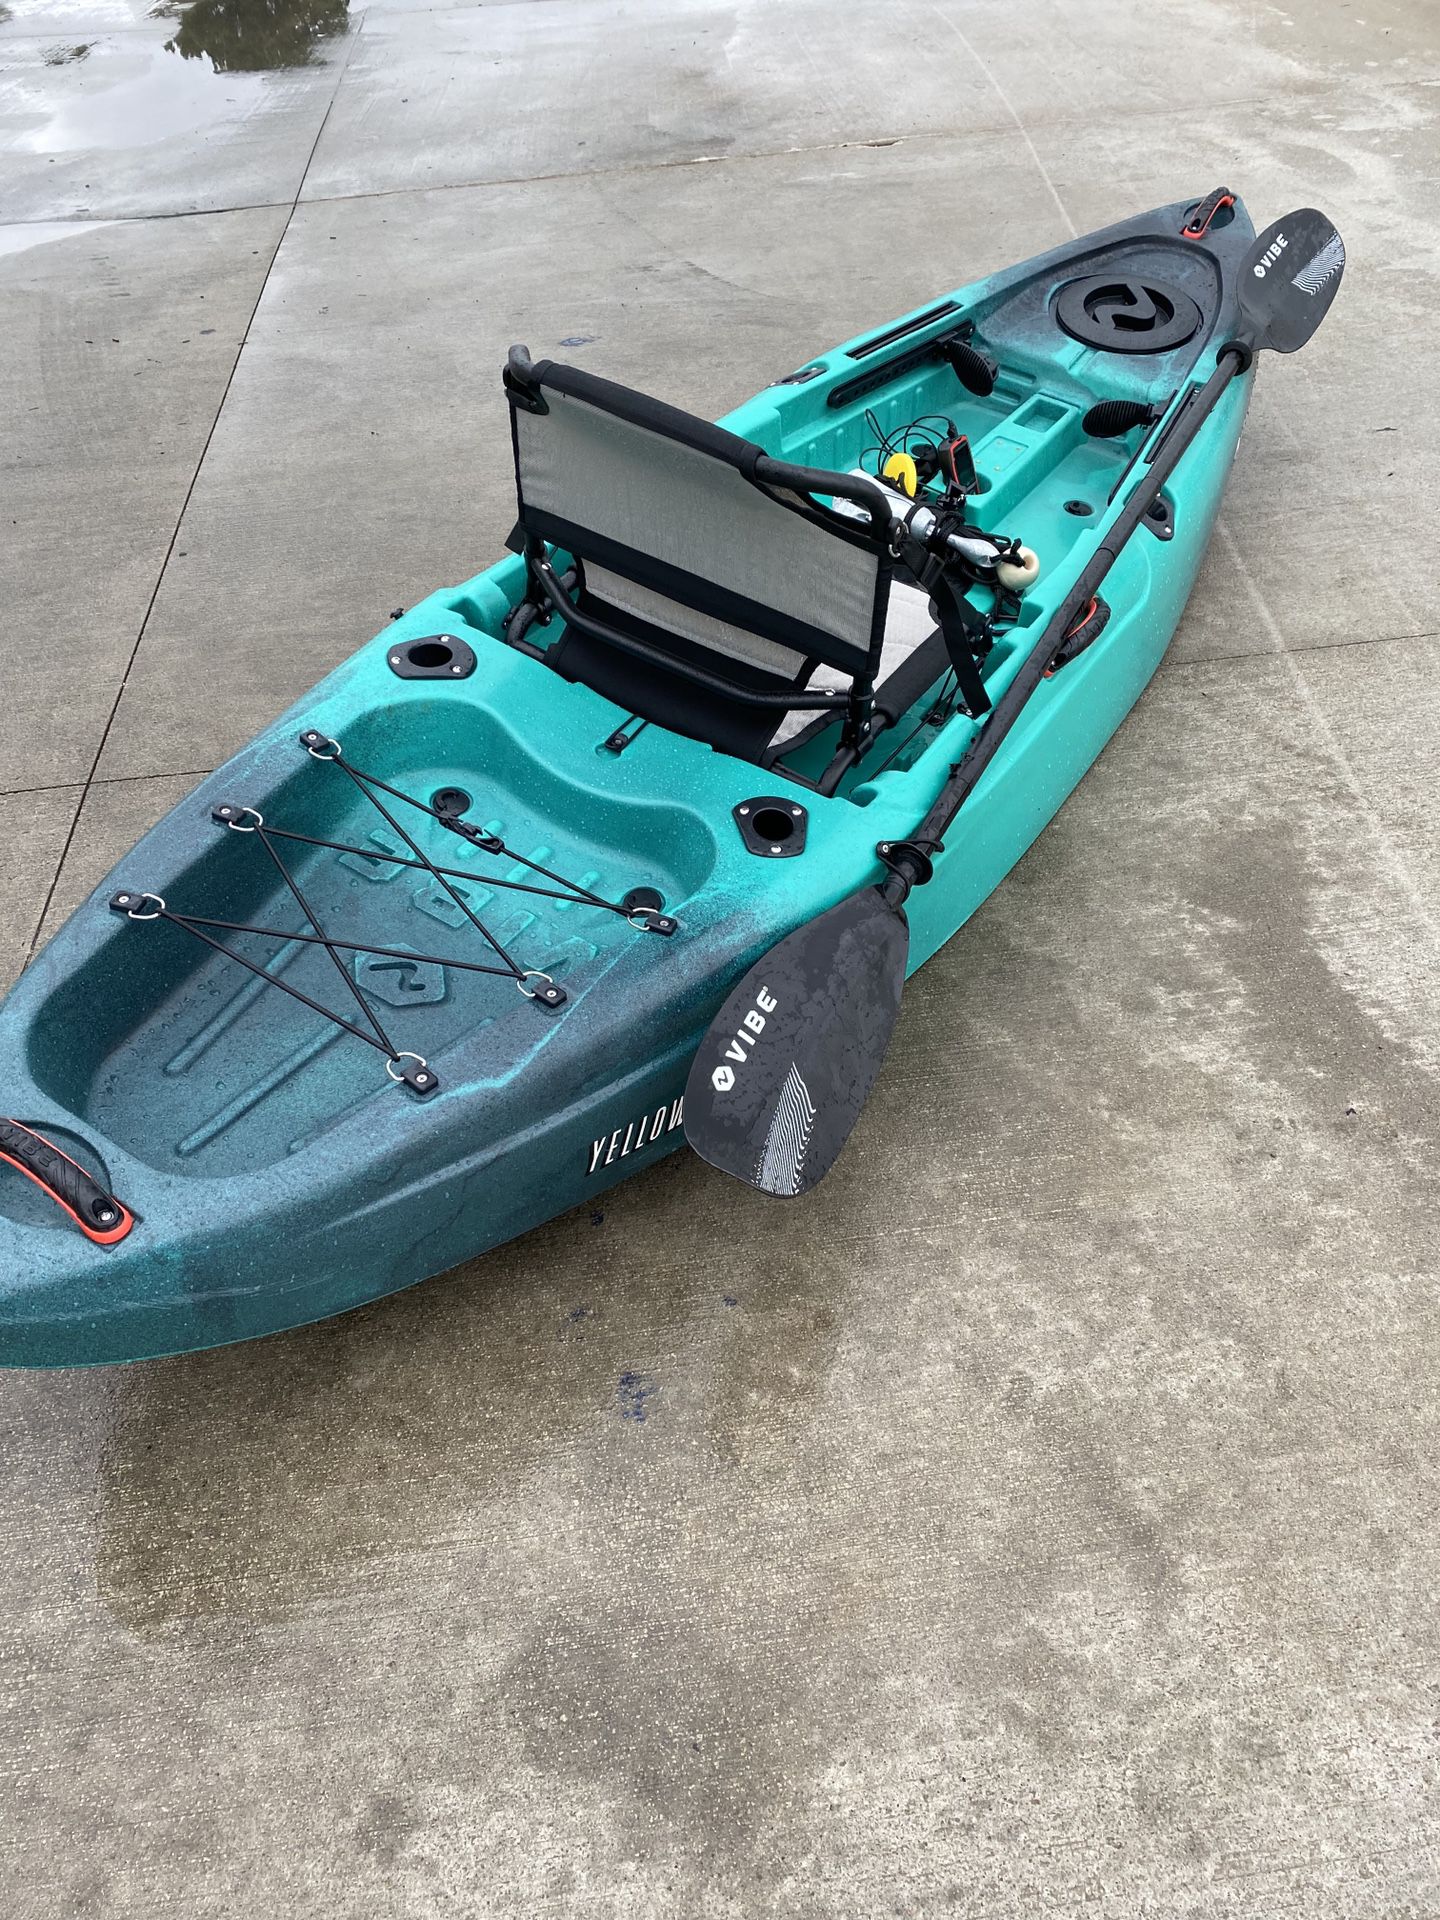 Vibe Yellowfin 100 Kayak!!! Includes Seat, Life Jacket, Fish Finder, Anchor!!! Only Used Once!!!